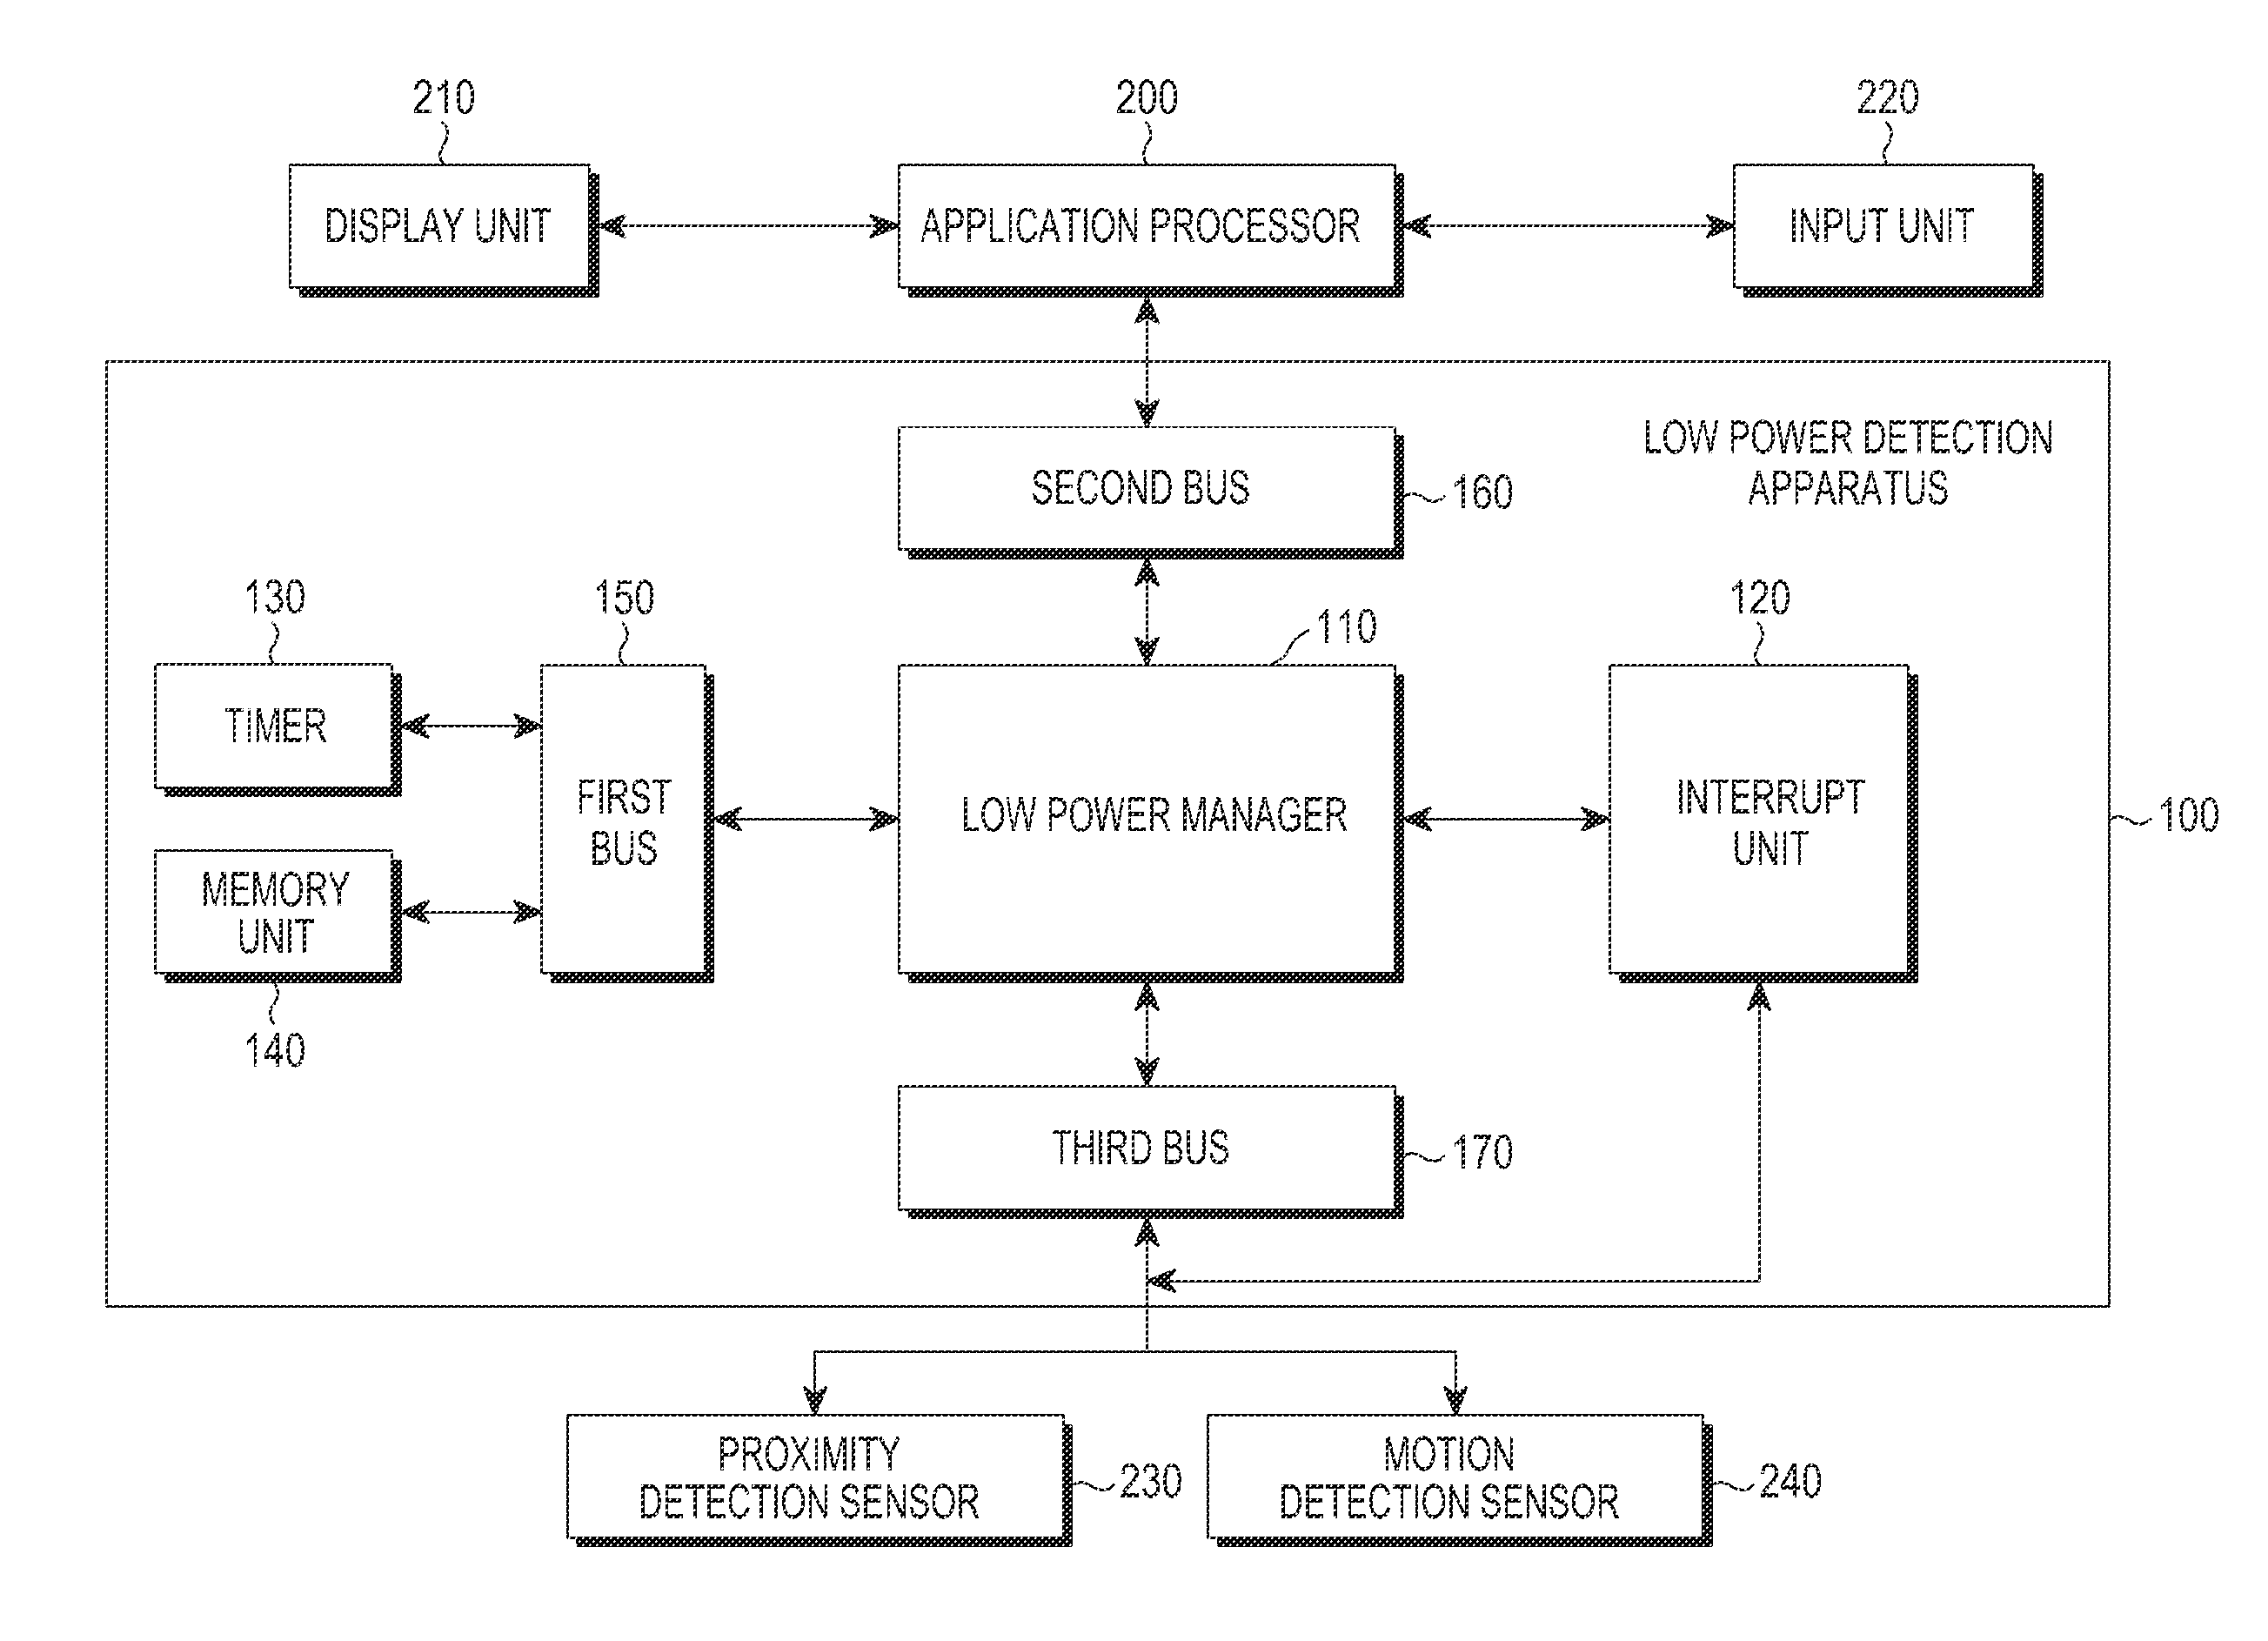 Low power detection apparatus and method for displaying information